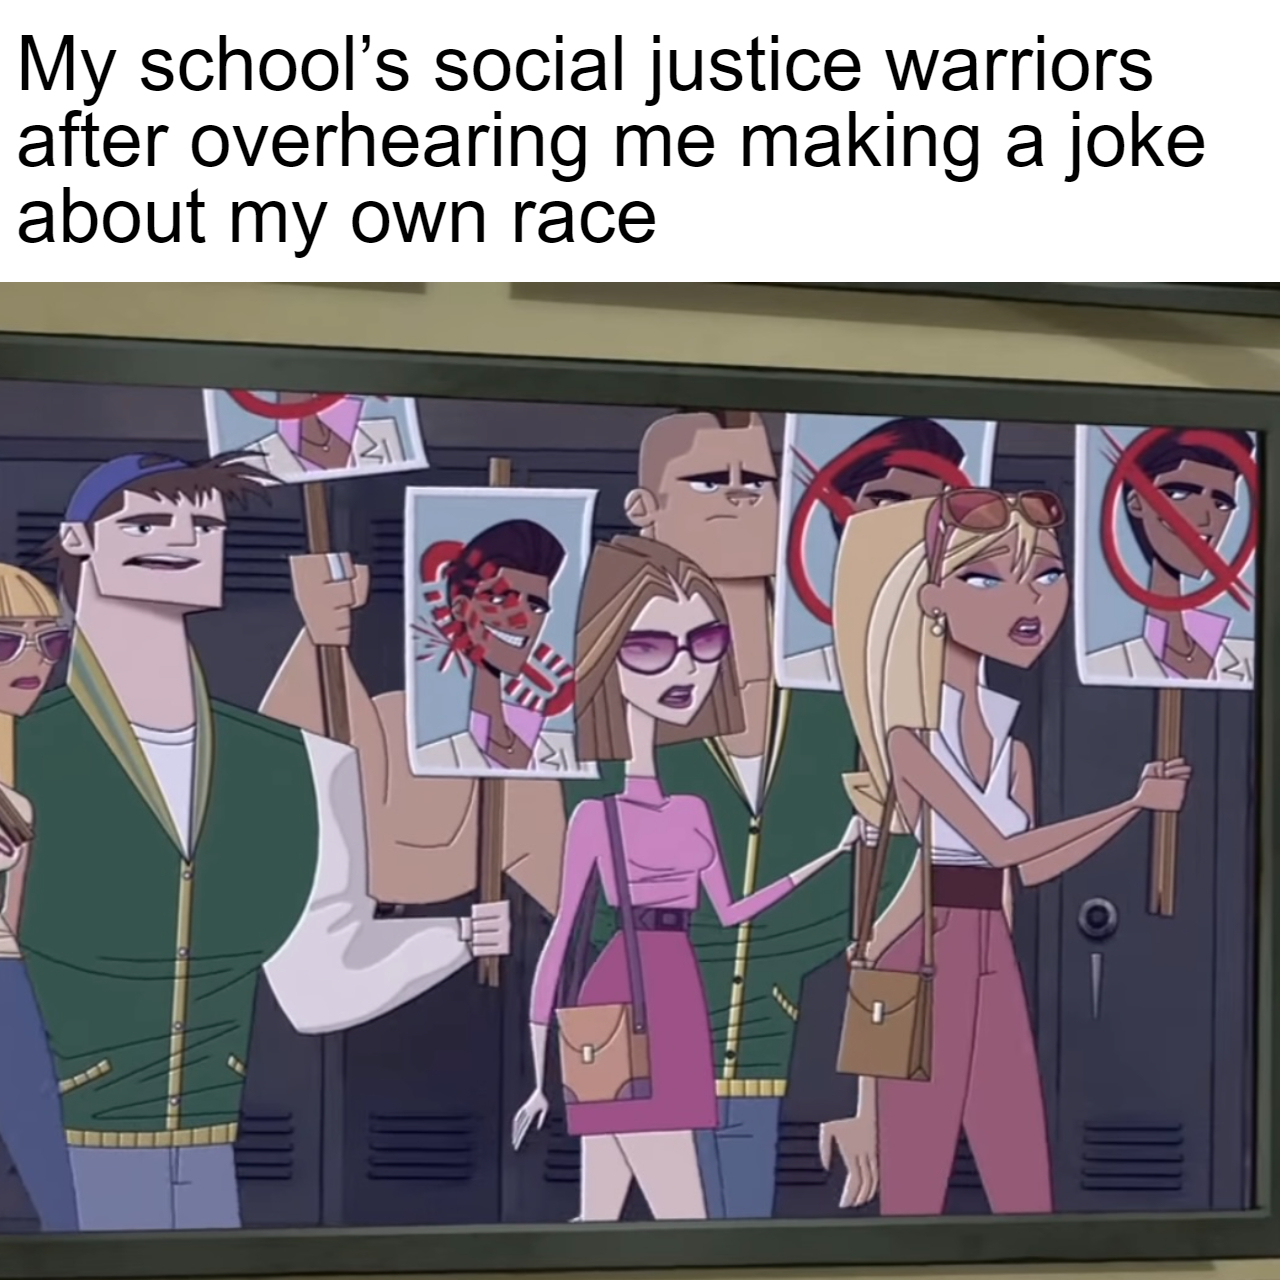 funny memes - dank memes cartoon - My school's social justice warriors after overhearing me making a joke about my own race 3